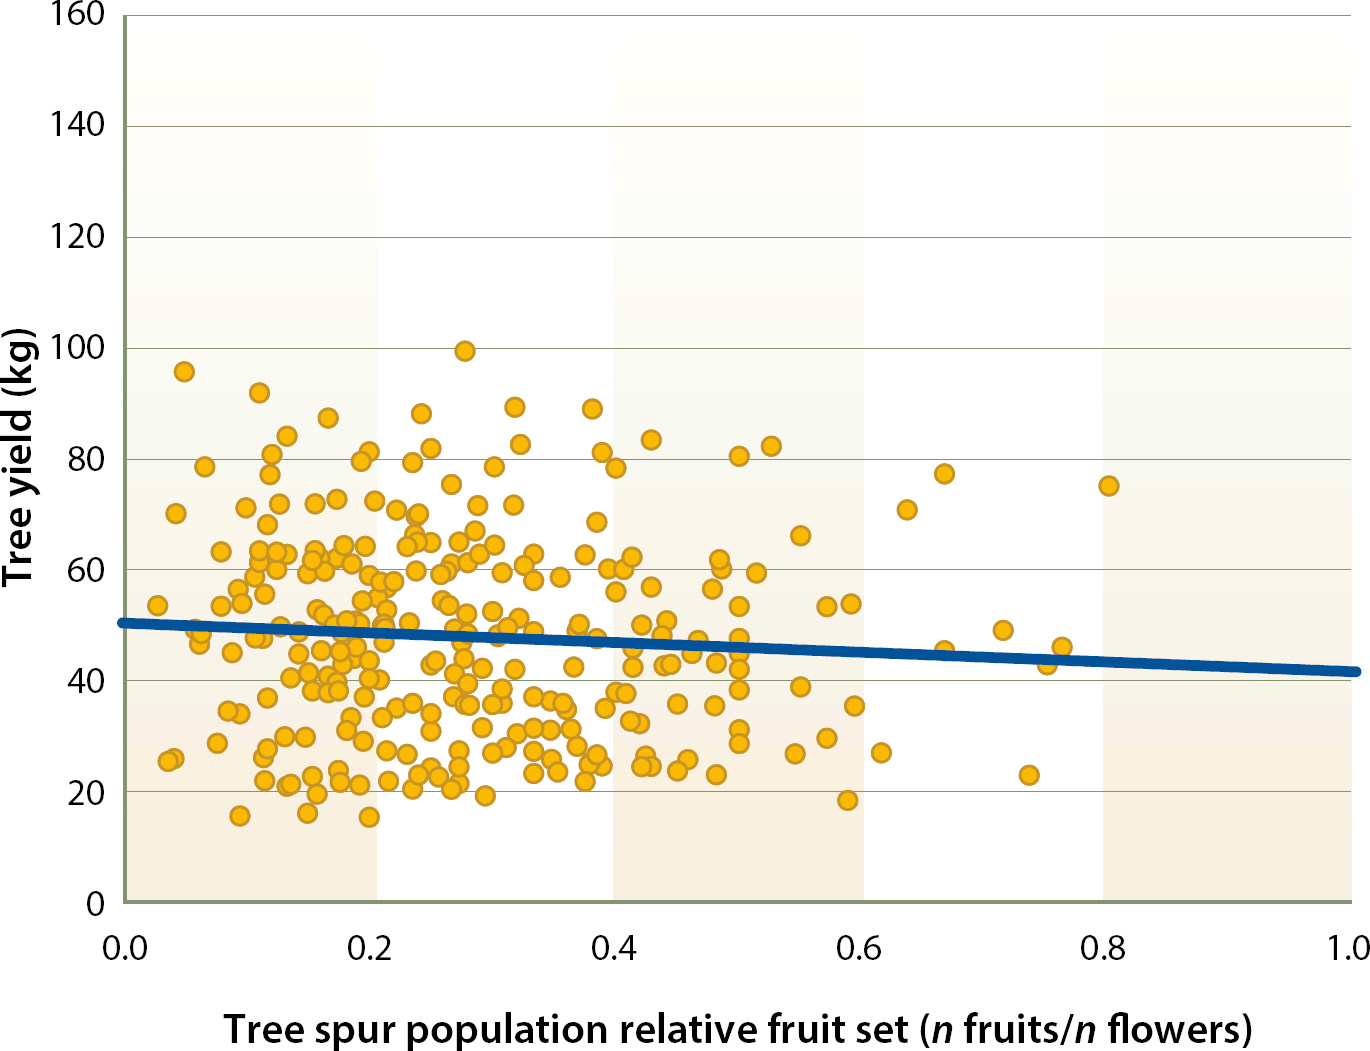 Relationship between tree kernel yield and tree relative fruit set of the tagged spur population from 2002 to 2007 (R2 = 0.005 P = 0.23). 1 kg = 2.2 lb.